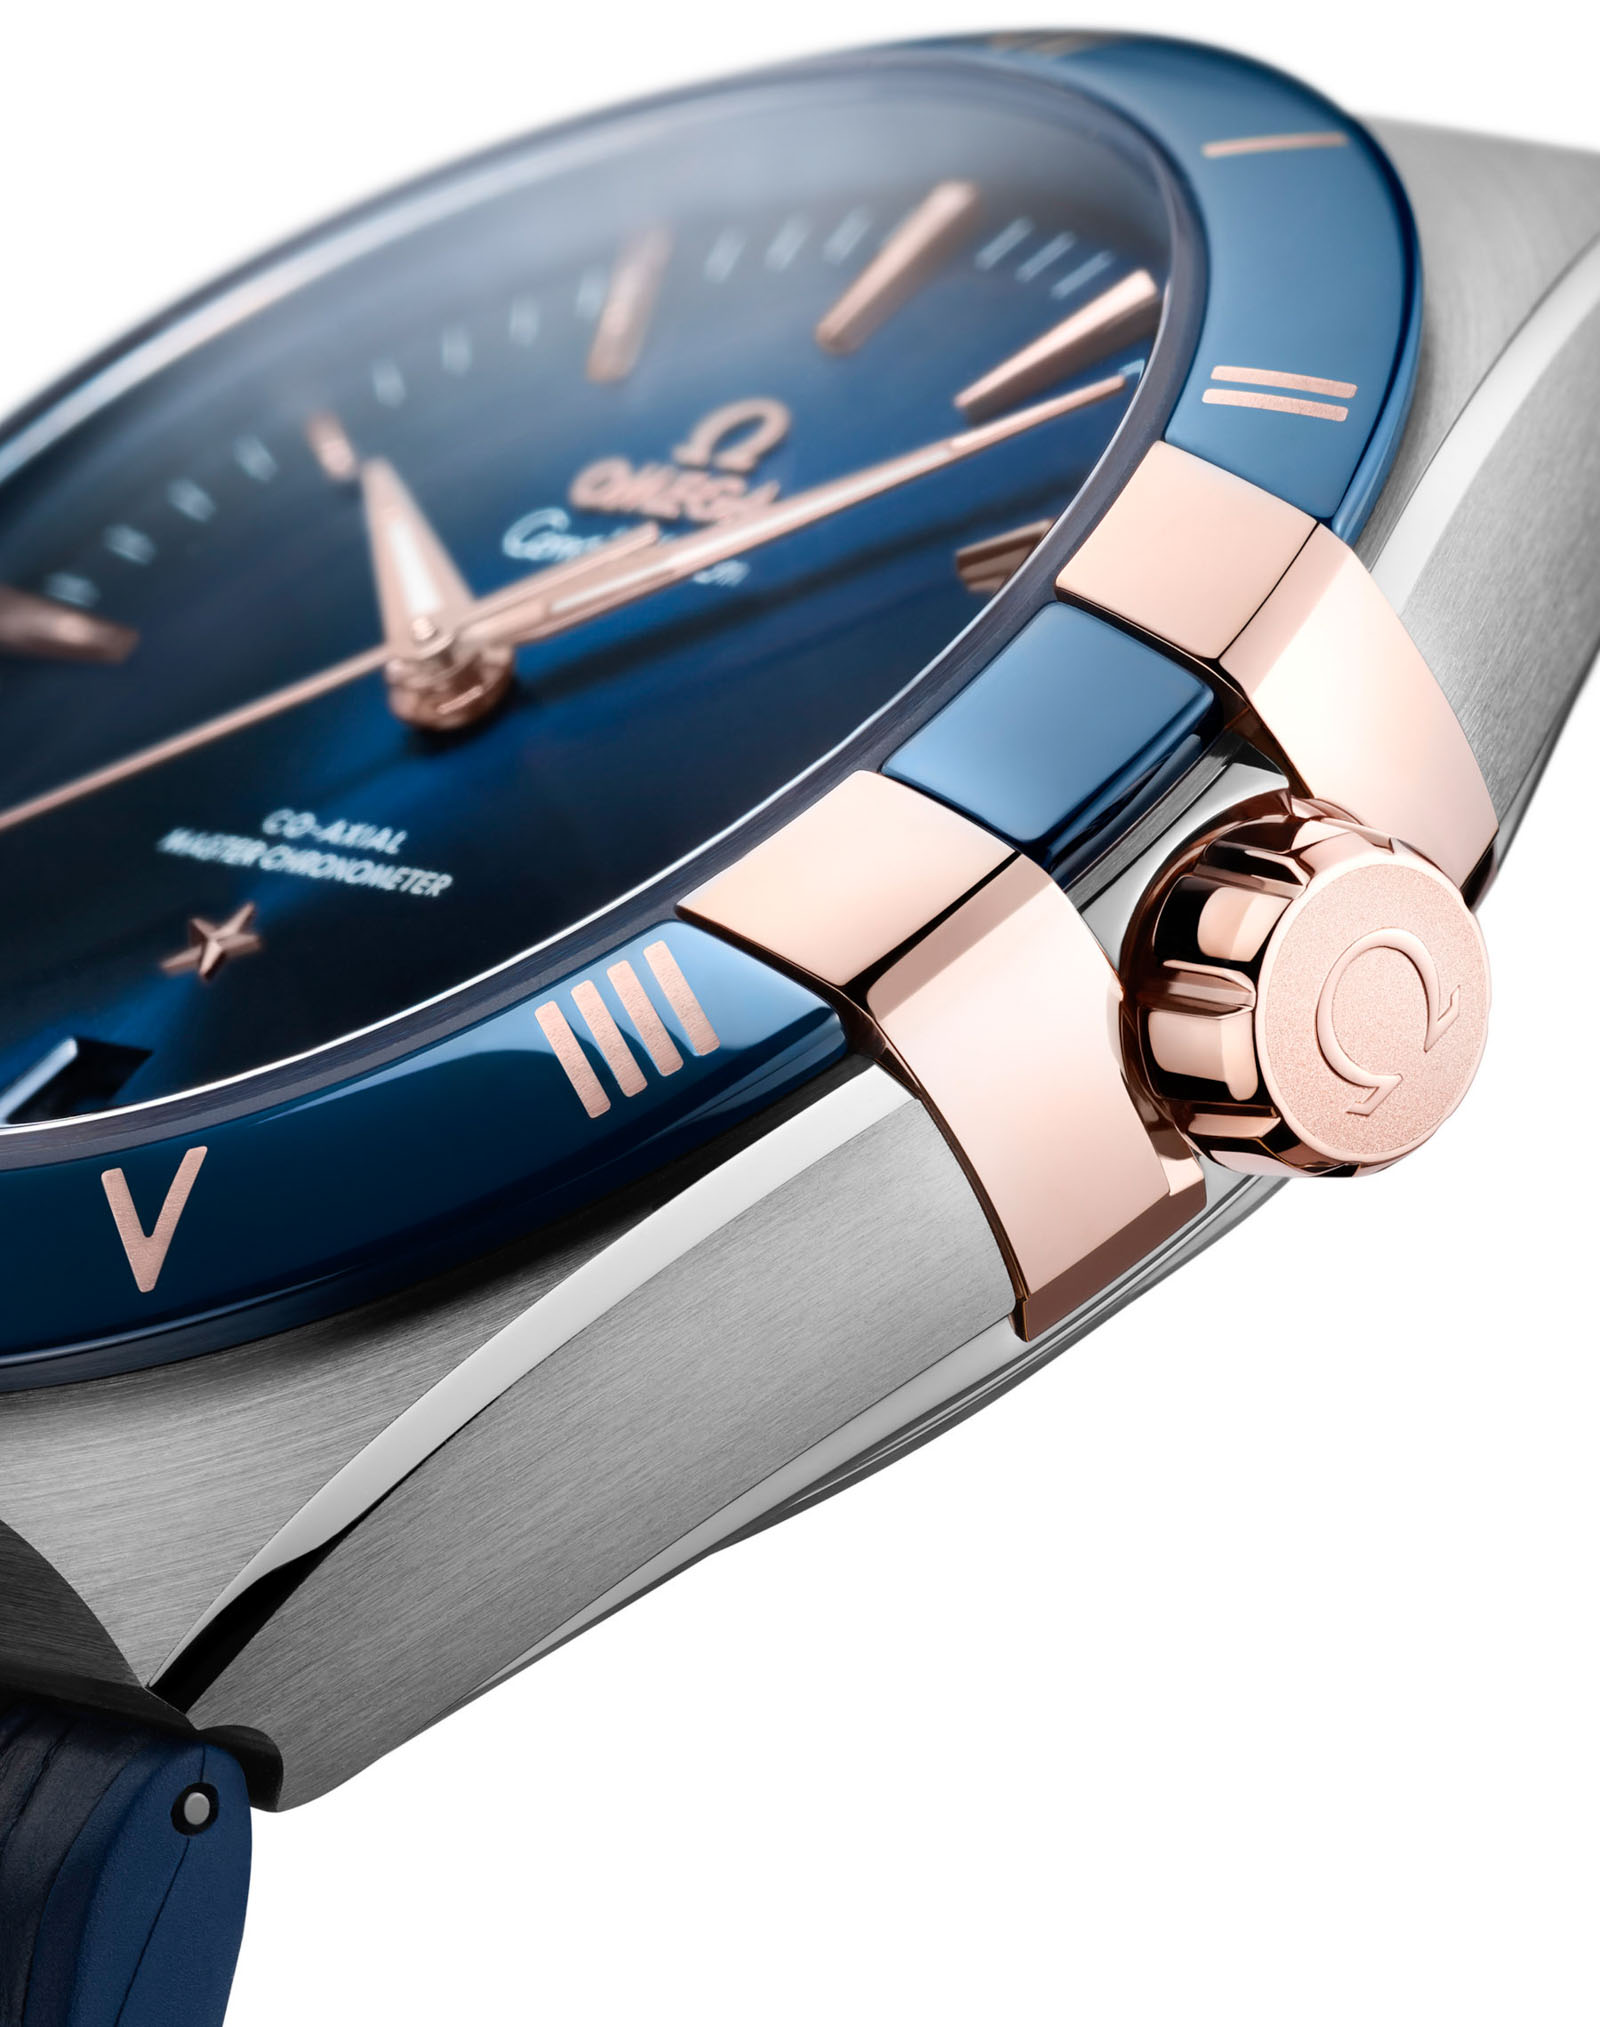 Omega's new Constellation variations Omega-Constellation-Gents-41mm-2020-aBlogtoWatch-131-63-41-21-03-001-1